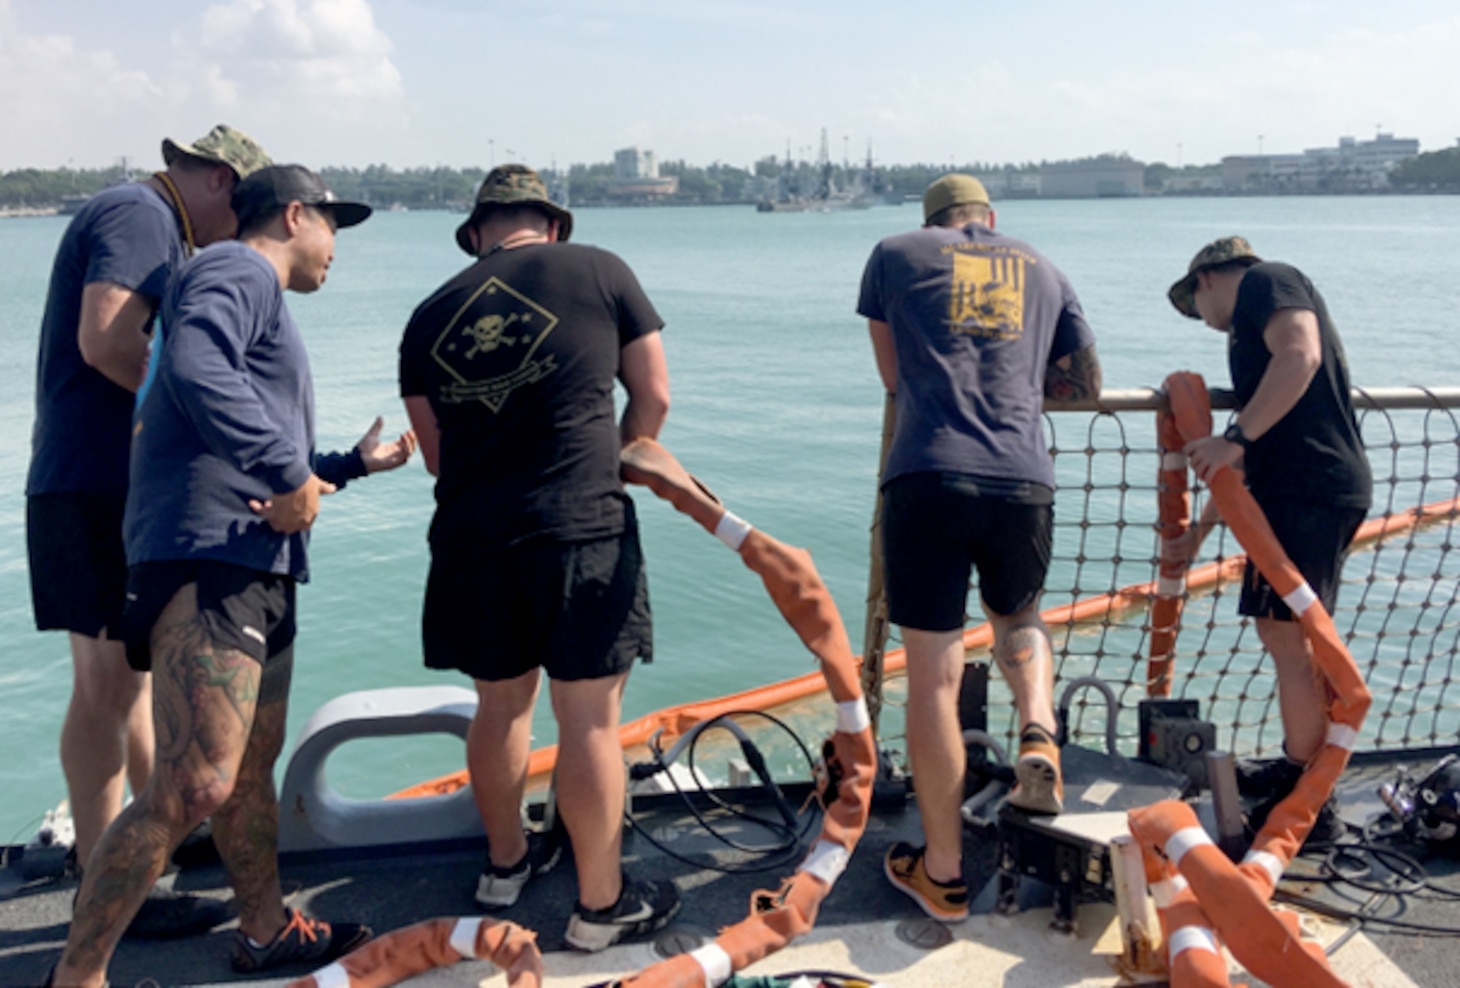 U.S. Navy and Marine Corps divers provide support to the USS John S. McCain (DDG 56) at Changi Naval Base, Singapore Aug. 23, 2017. The McCain sustained significant damage following a collision with the merchant vessel Alnic MC while underway east of the Strait of Malacca and Singapore on Aug. 21, 2017.